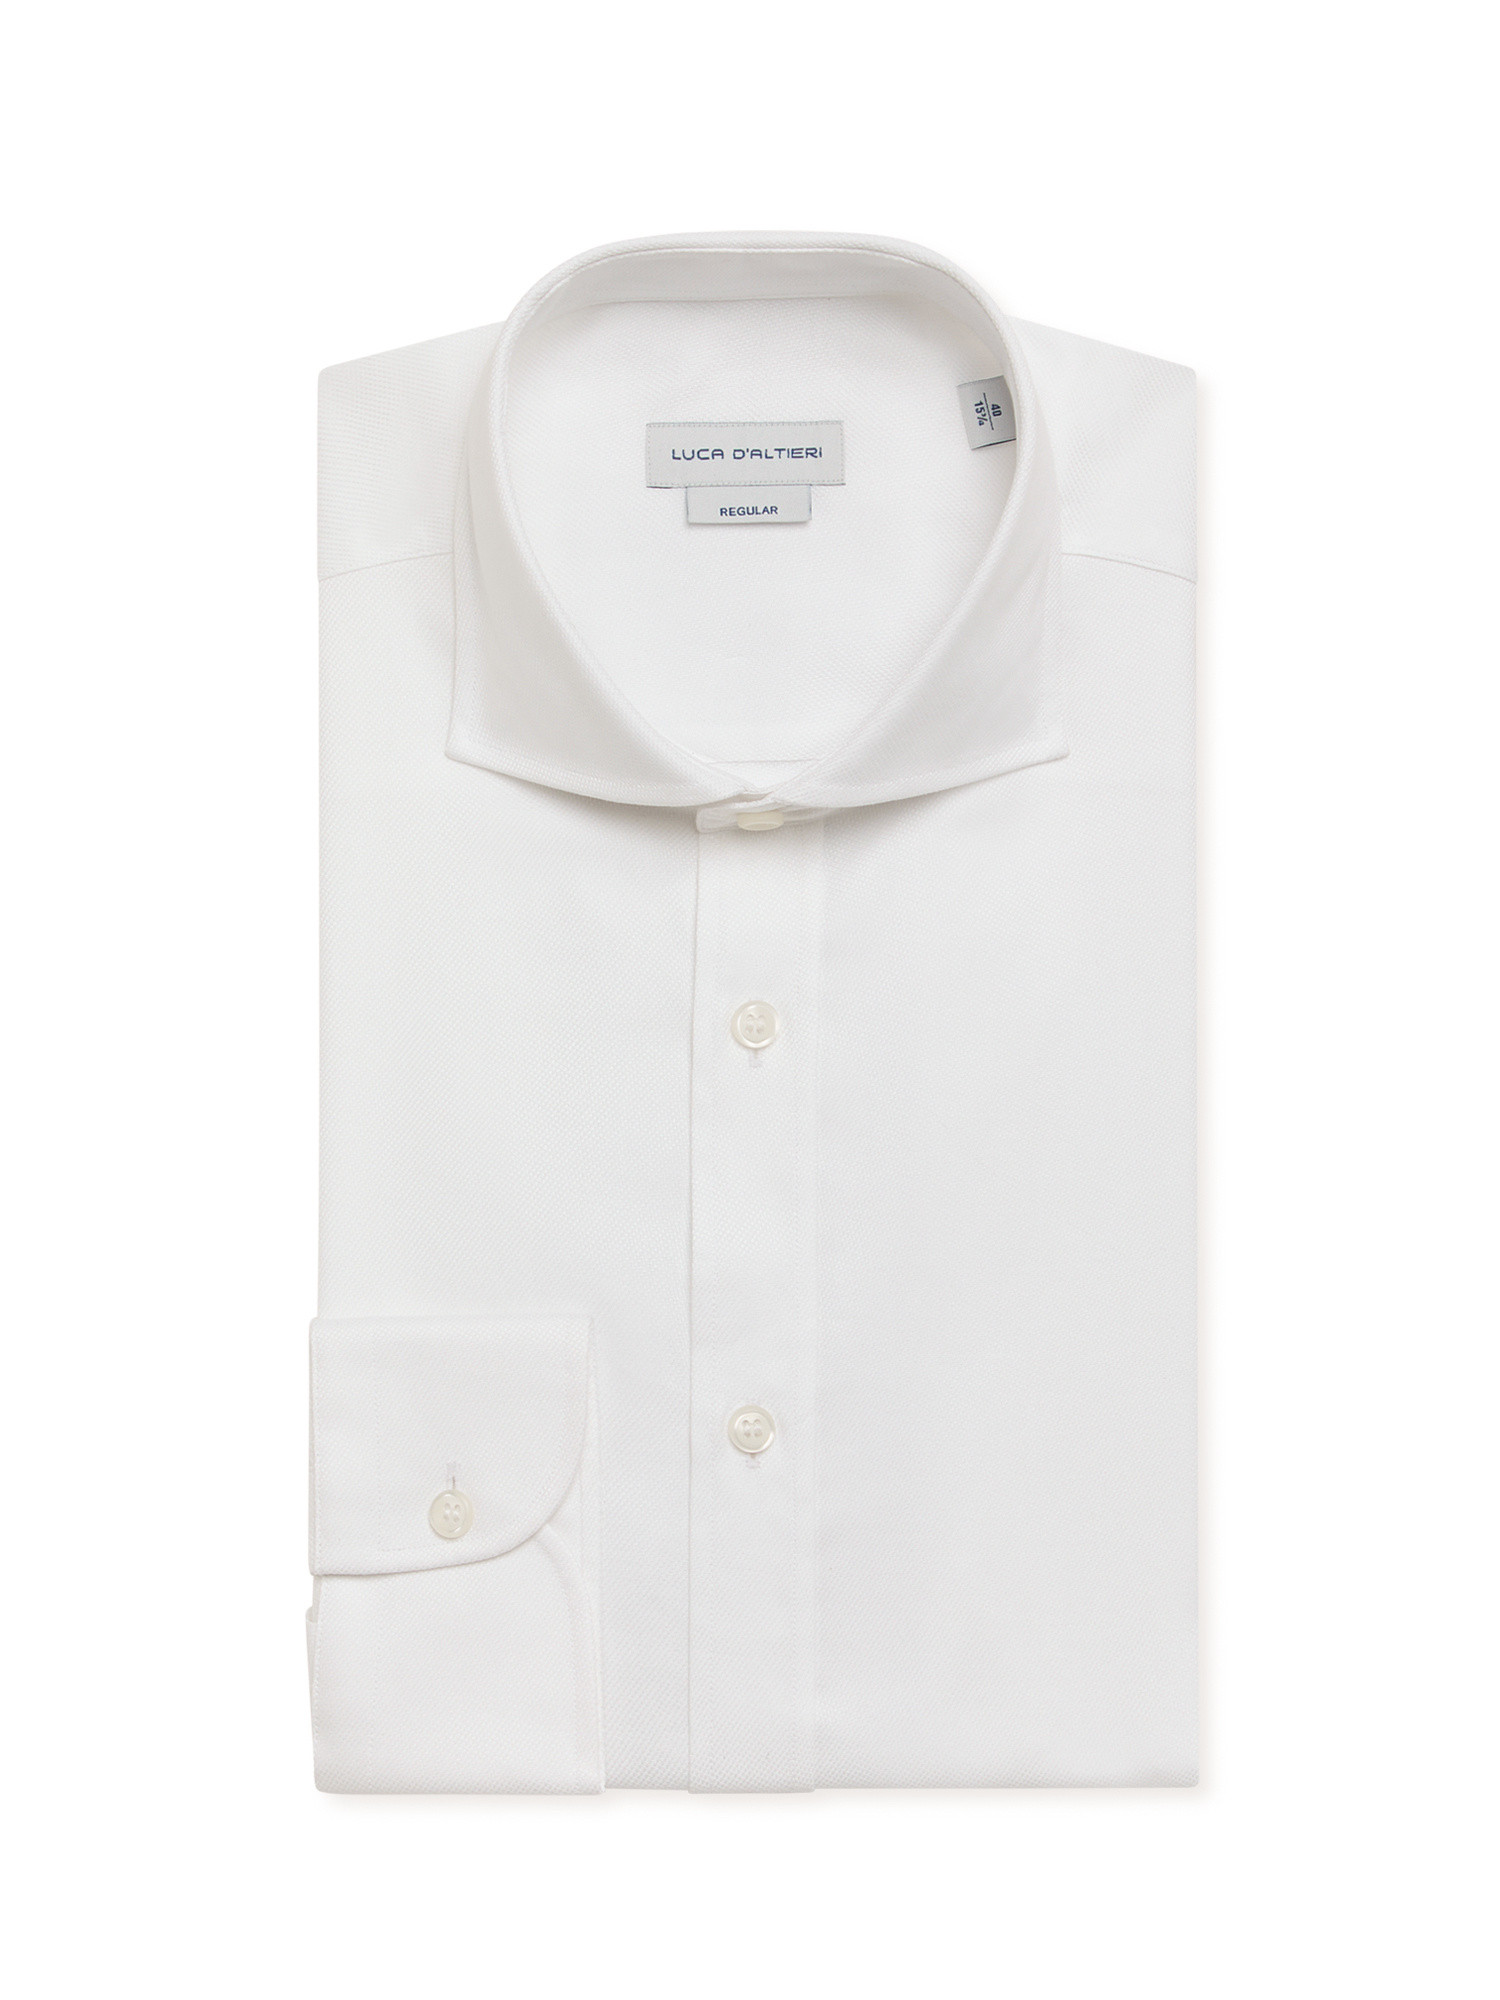 Luca D'Altieri - Regular fit shirt in fine cotton oxford, White, large image number 0